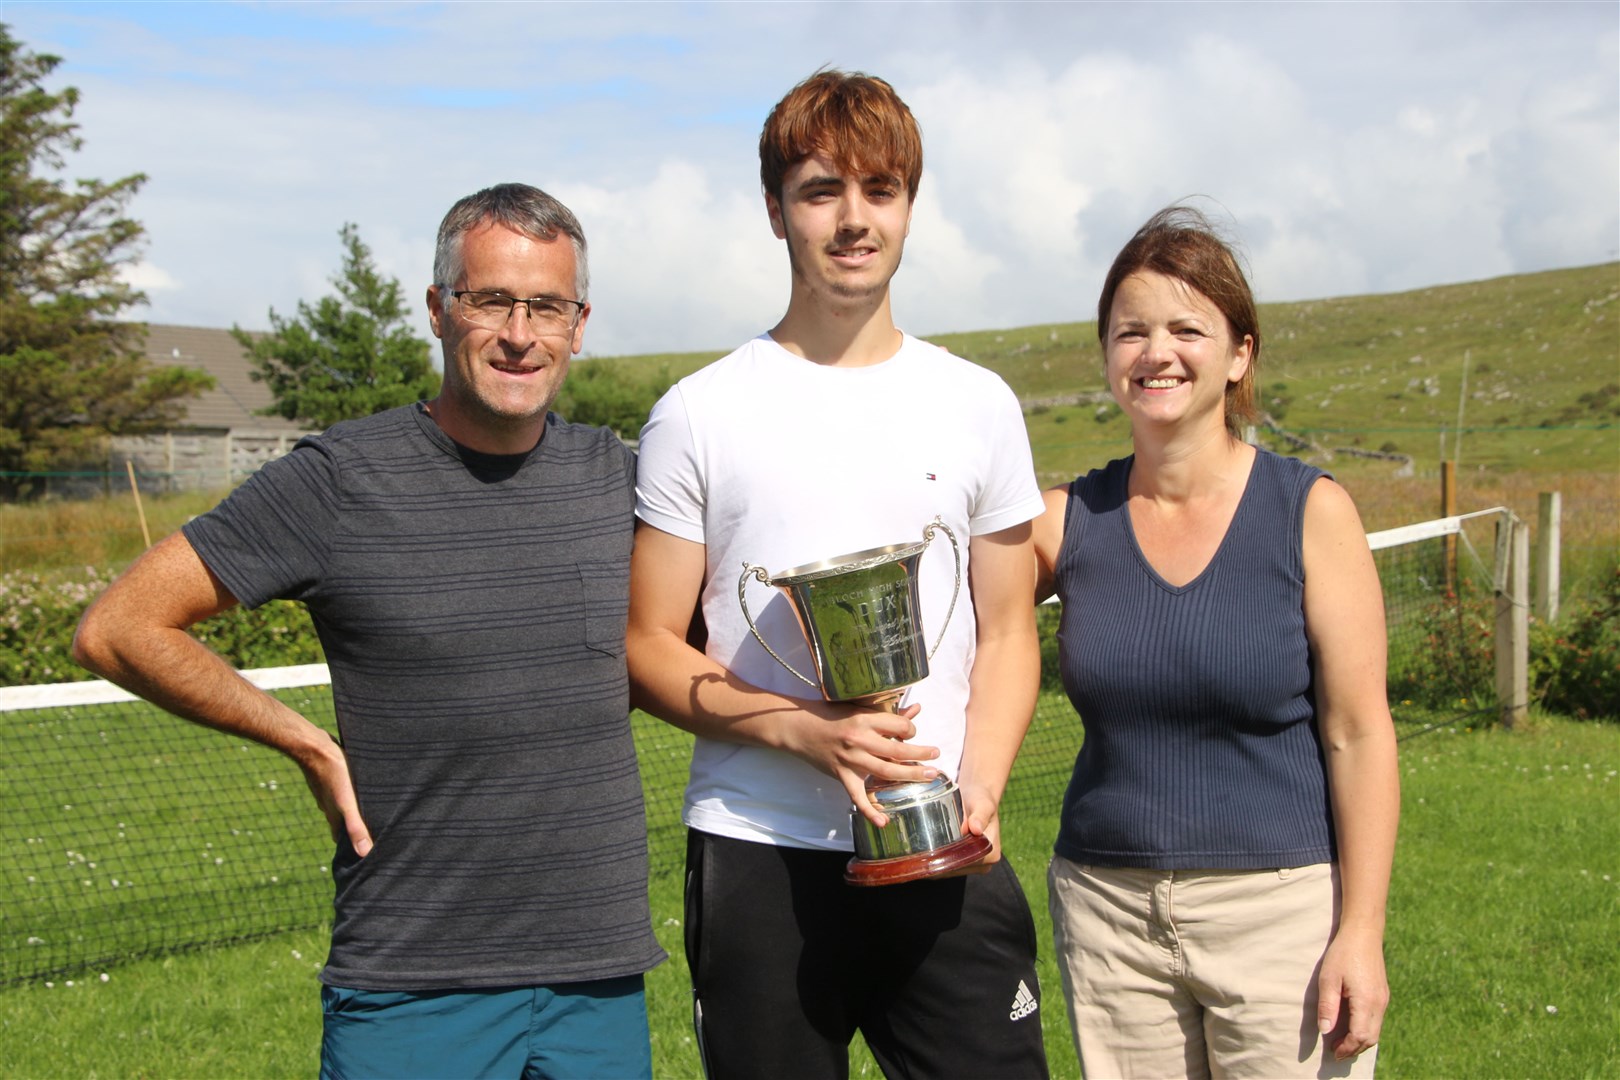 Eoin Cumming, named school Dux, with parents Iain and Maureen Cumming at their home in Laide. He was praised for his hard work and dedication, which was always rewarded with several music prizes.